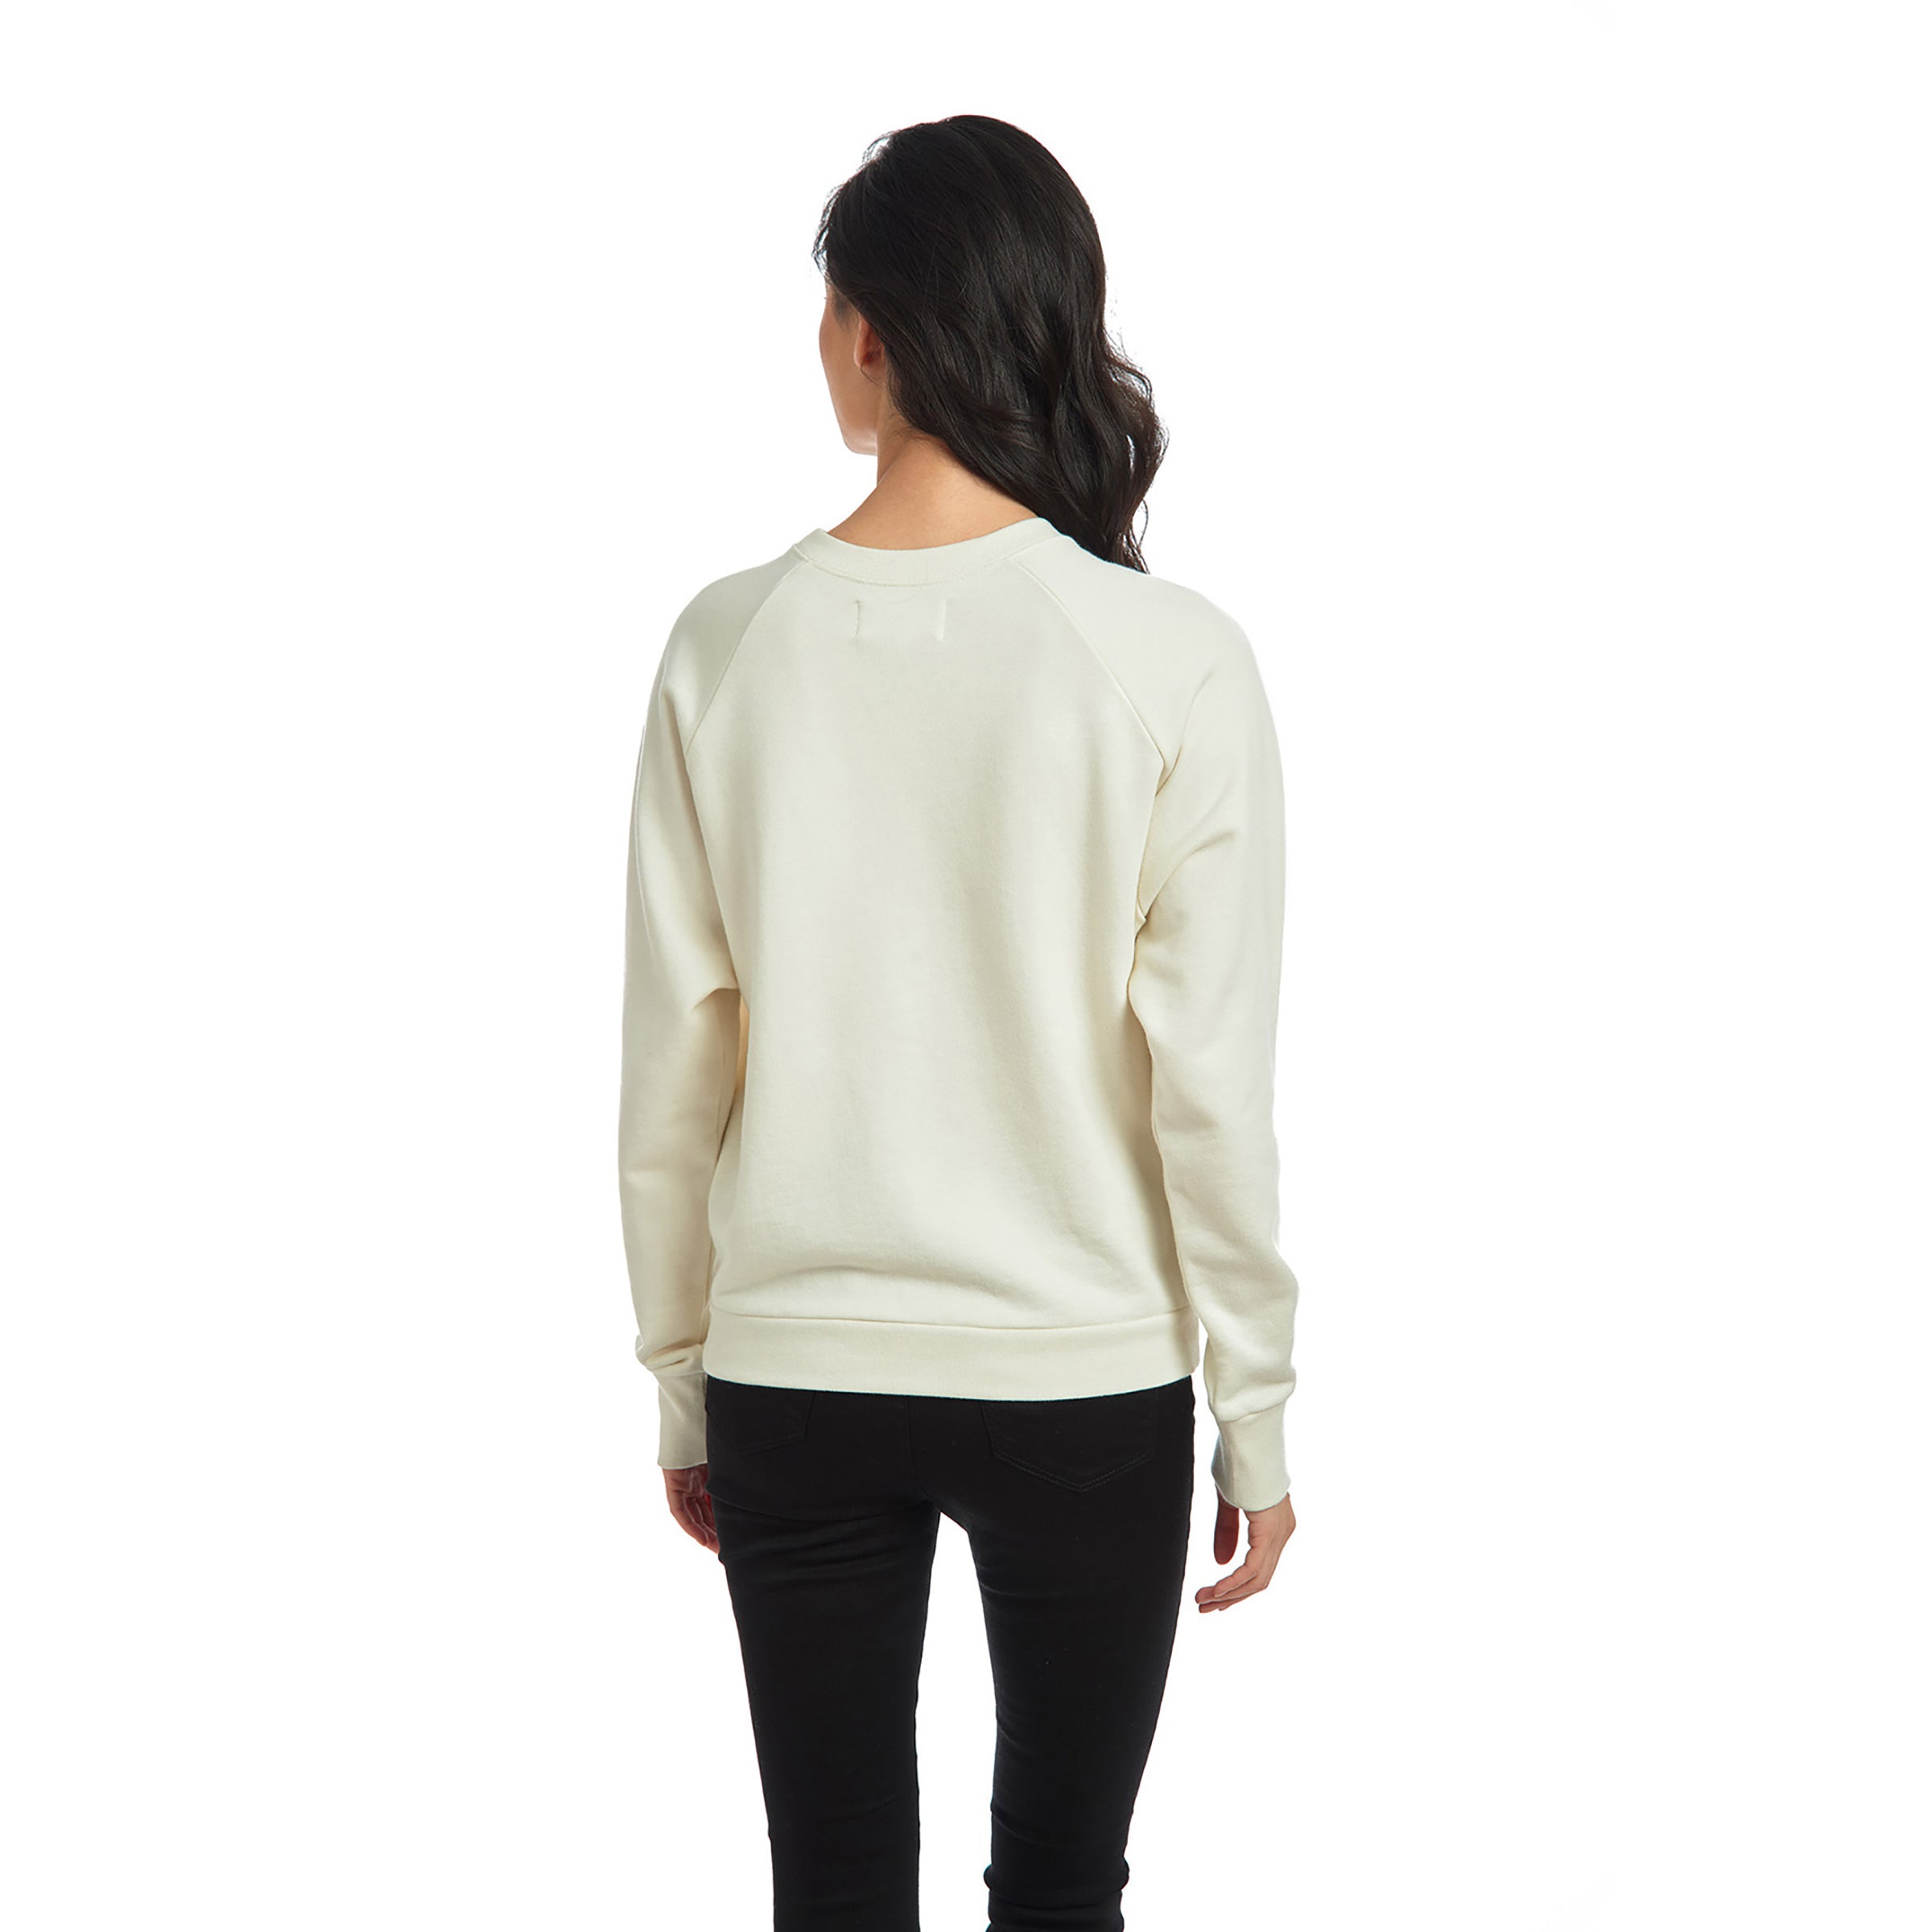 Women wearing Vintage White The French Terry Sweatshirt Surf